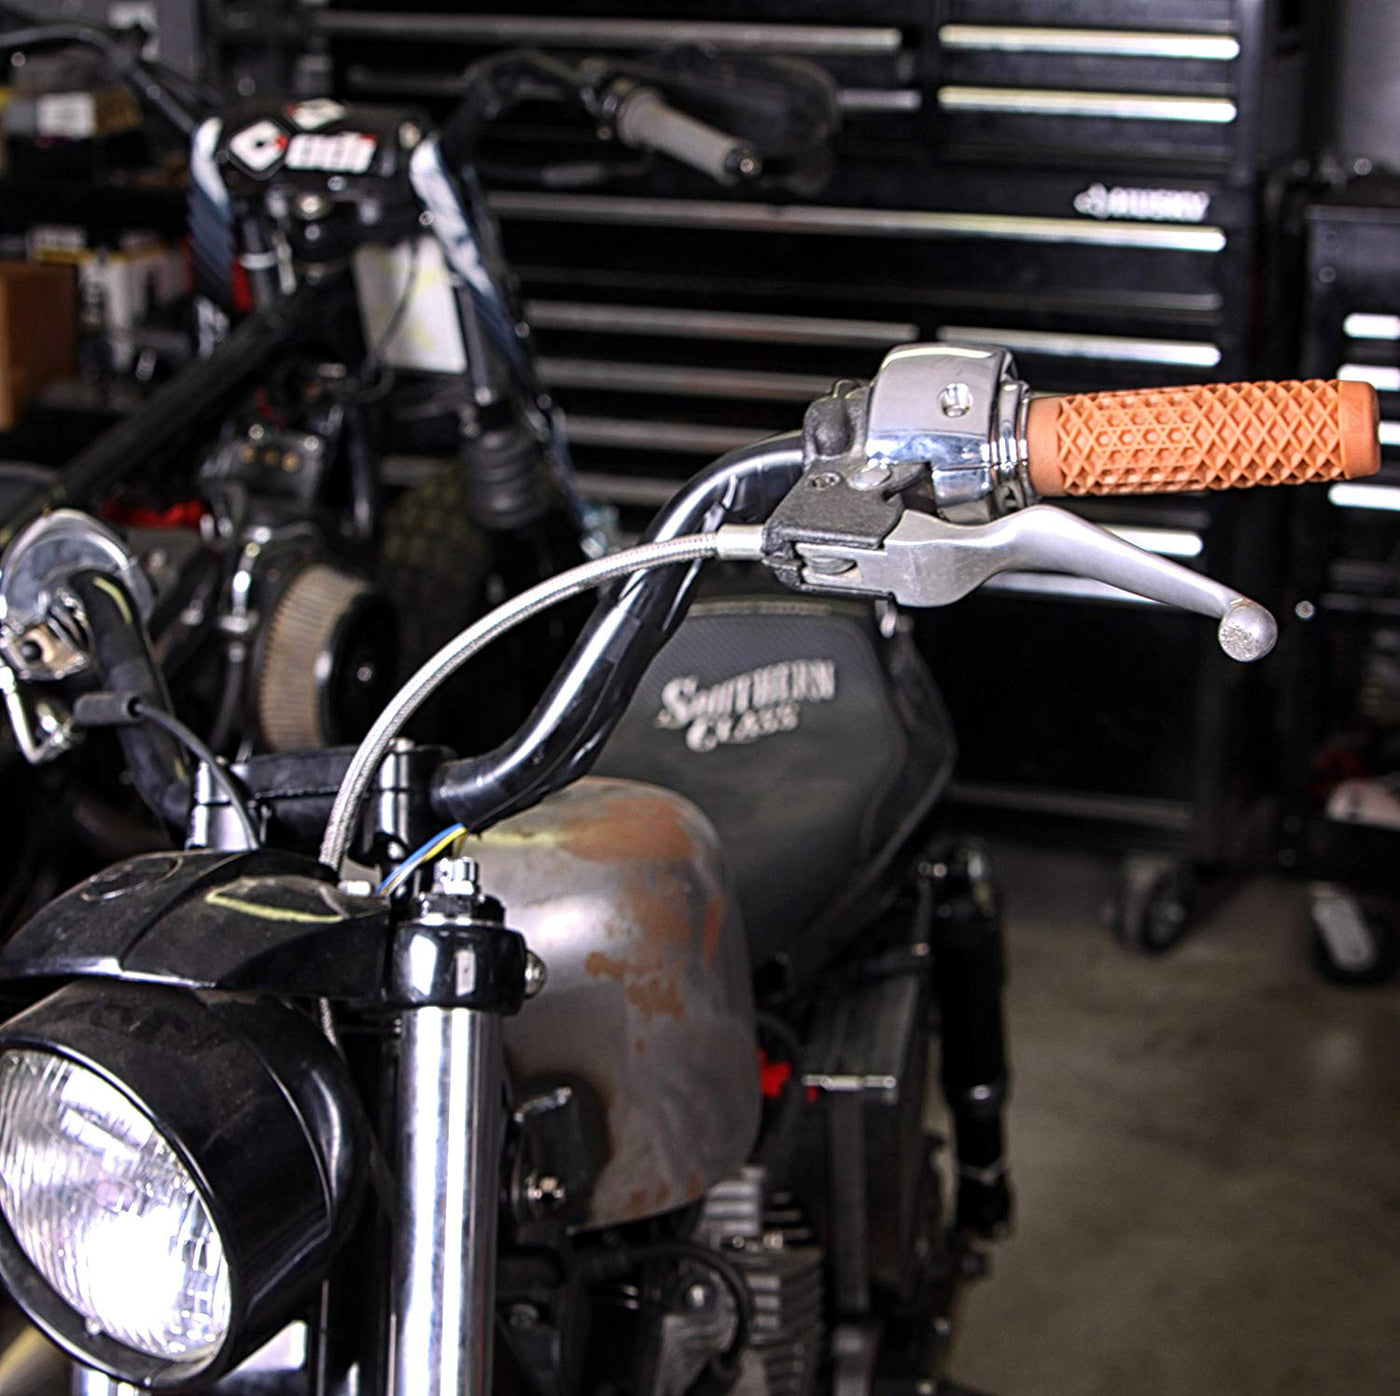 A ODI x Vans + Cult Motorcycle Grips - 1" Ox Blood parked in a garage.